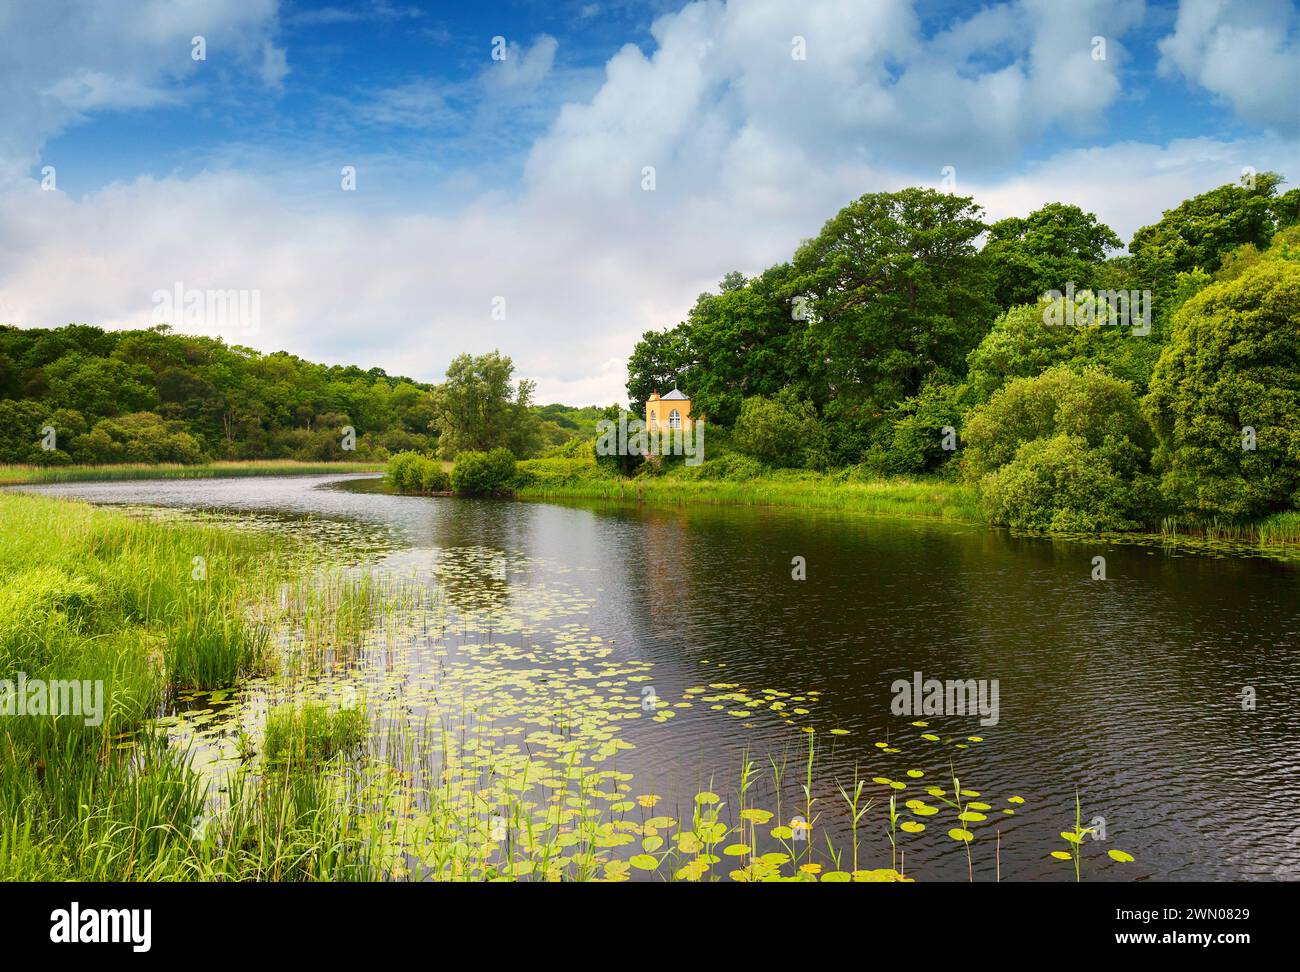 The little gazebo or summer house overlooking the lake on the estate of Crom Castle on Upper Lough Erne in County Fermanagh, Northern Ireland. Stock Photo